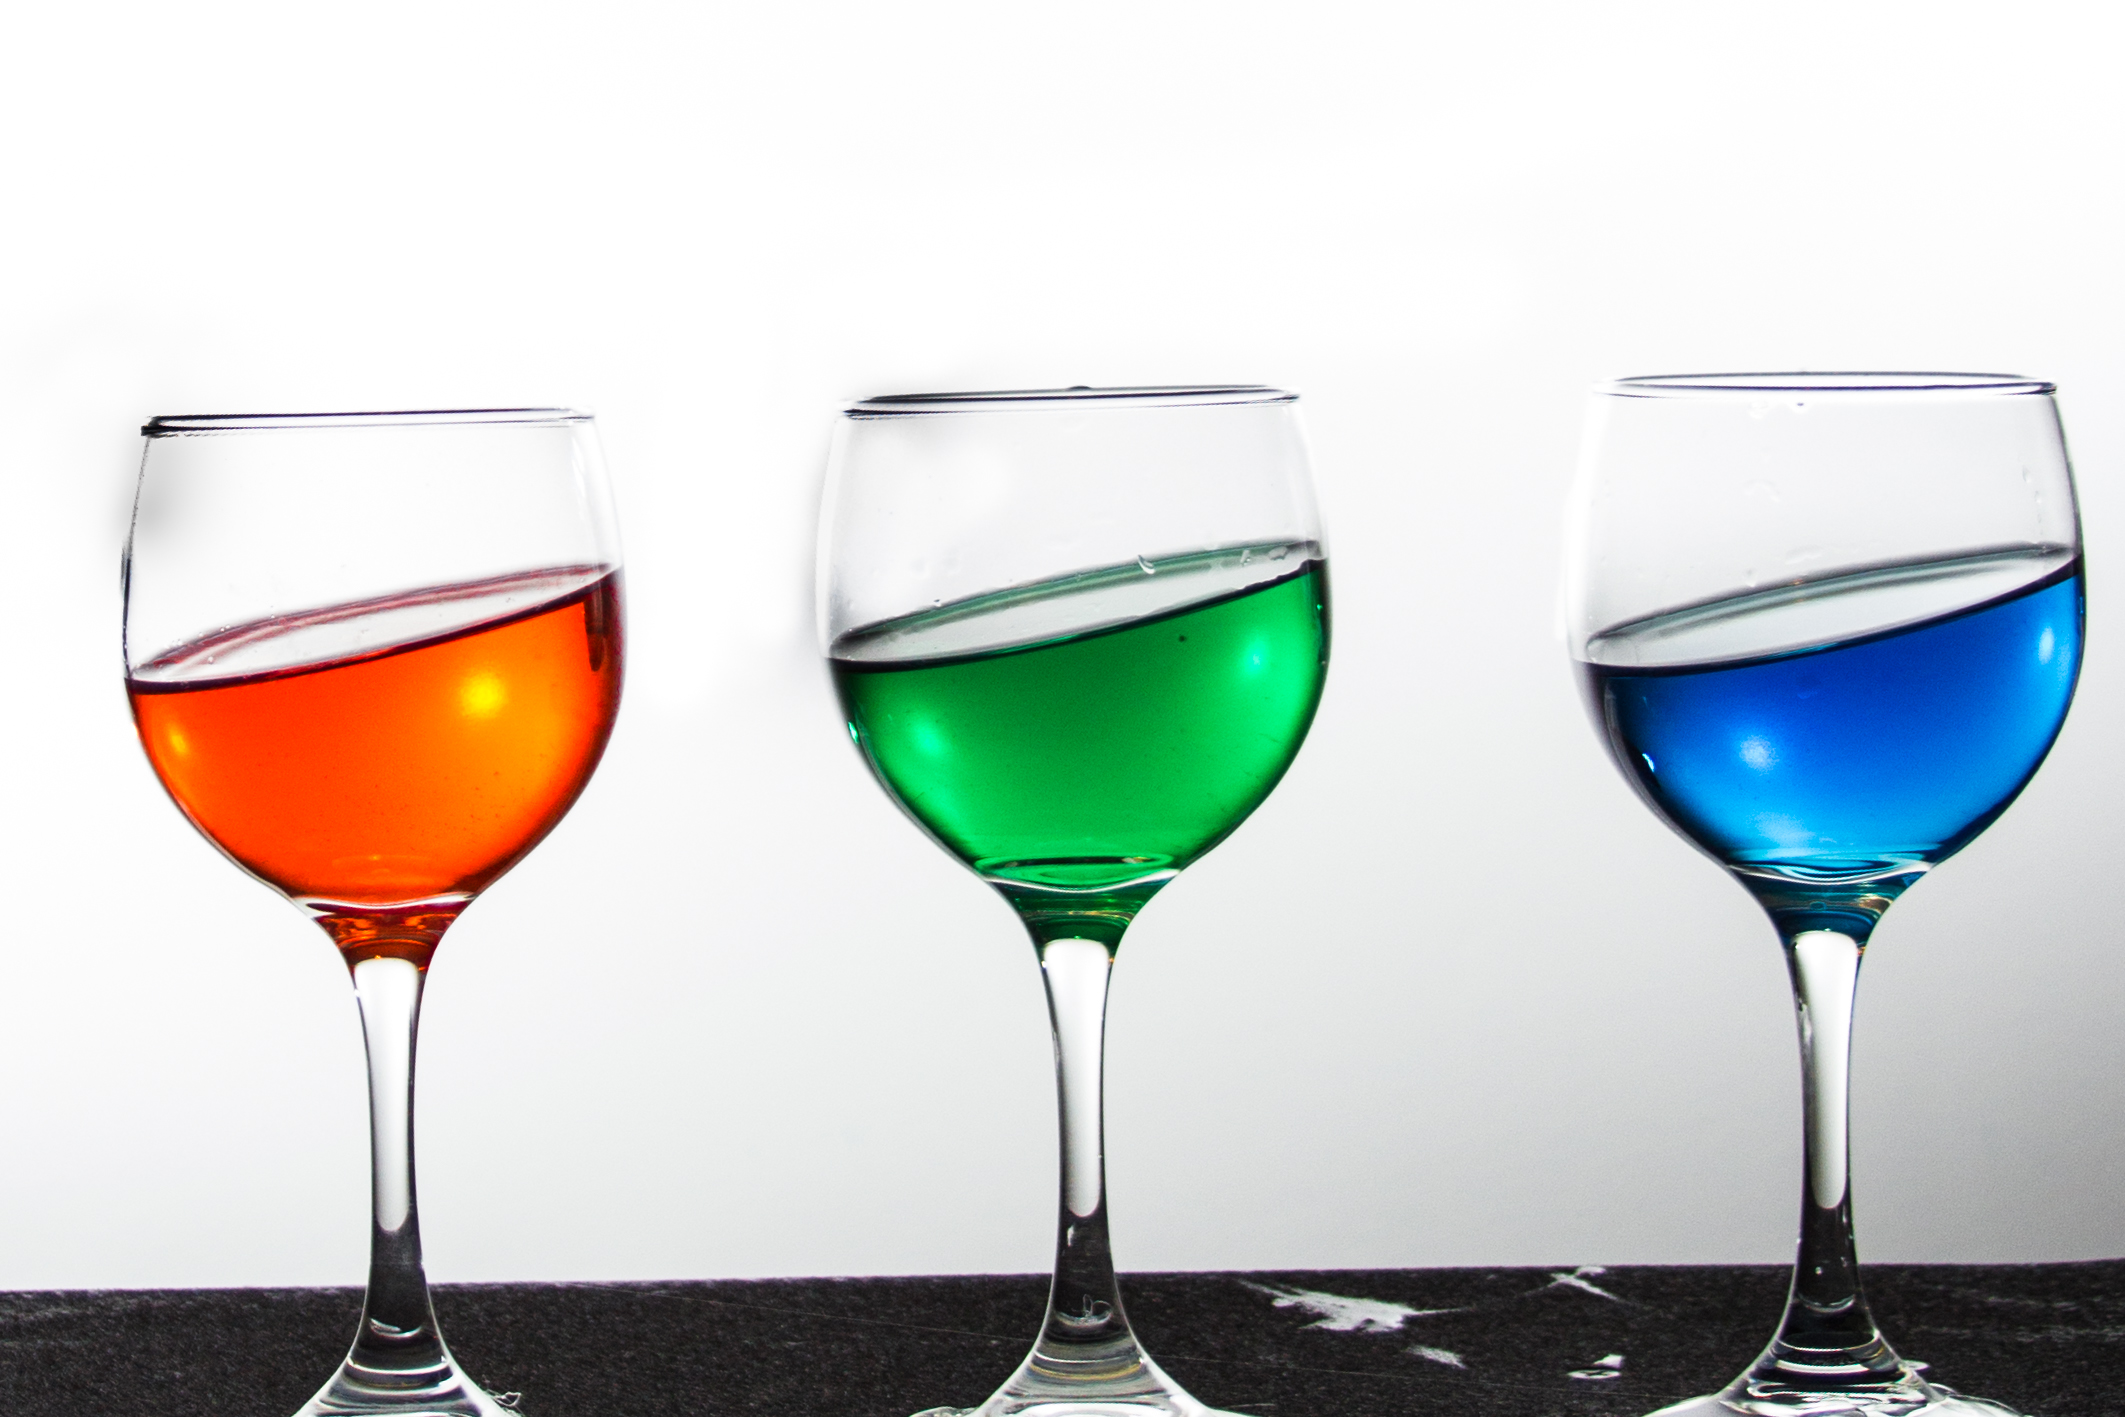 three wine glasses with different colored liquids in them